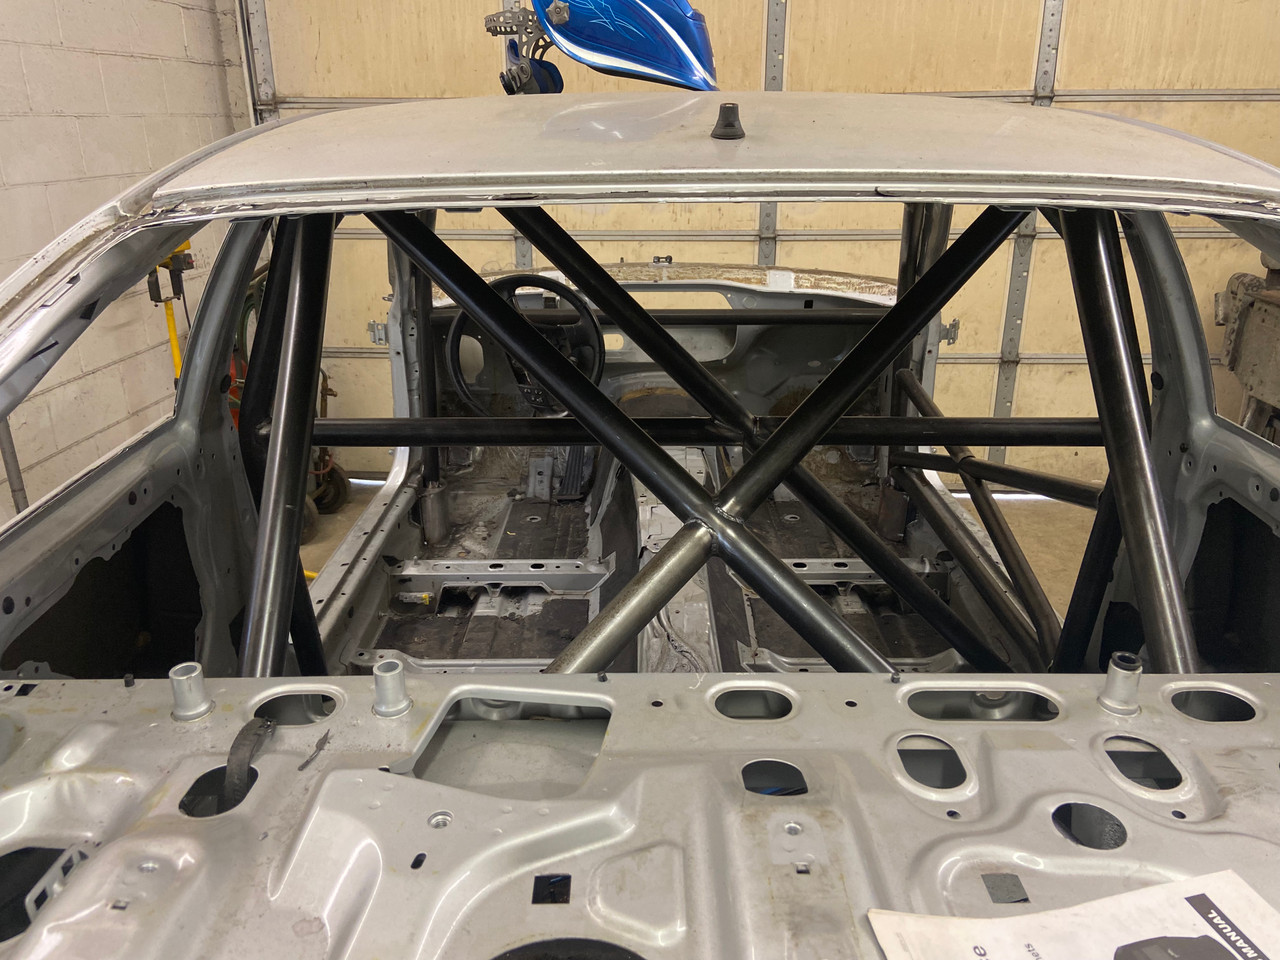 Roll Cage Components #1 Source for BMW Spec E46 Roll Cage Custom ...